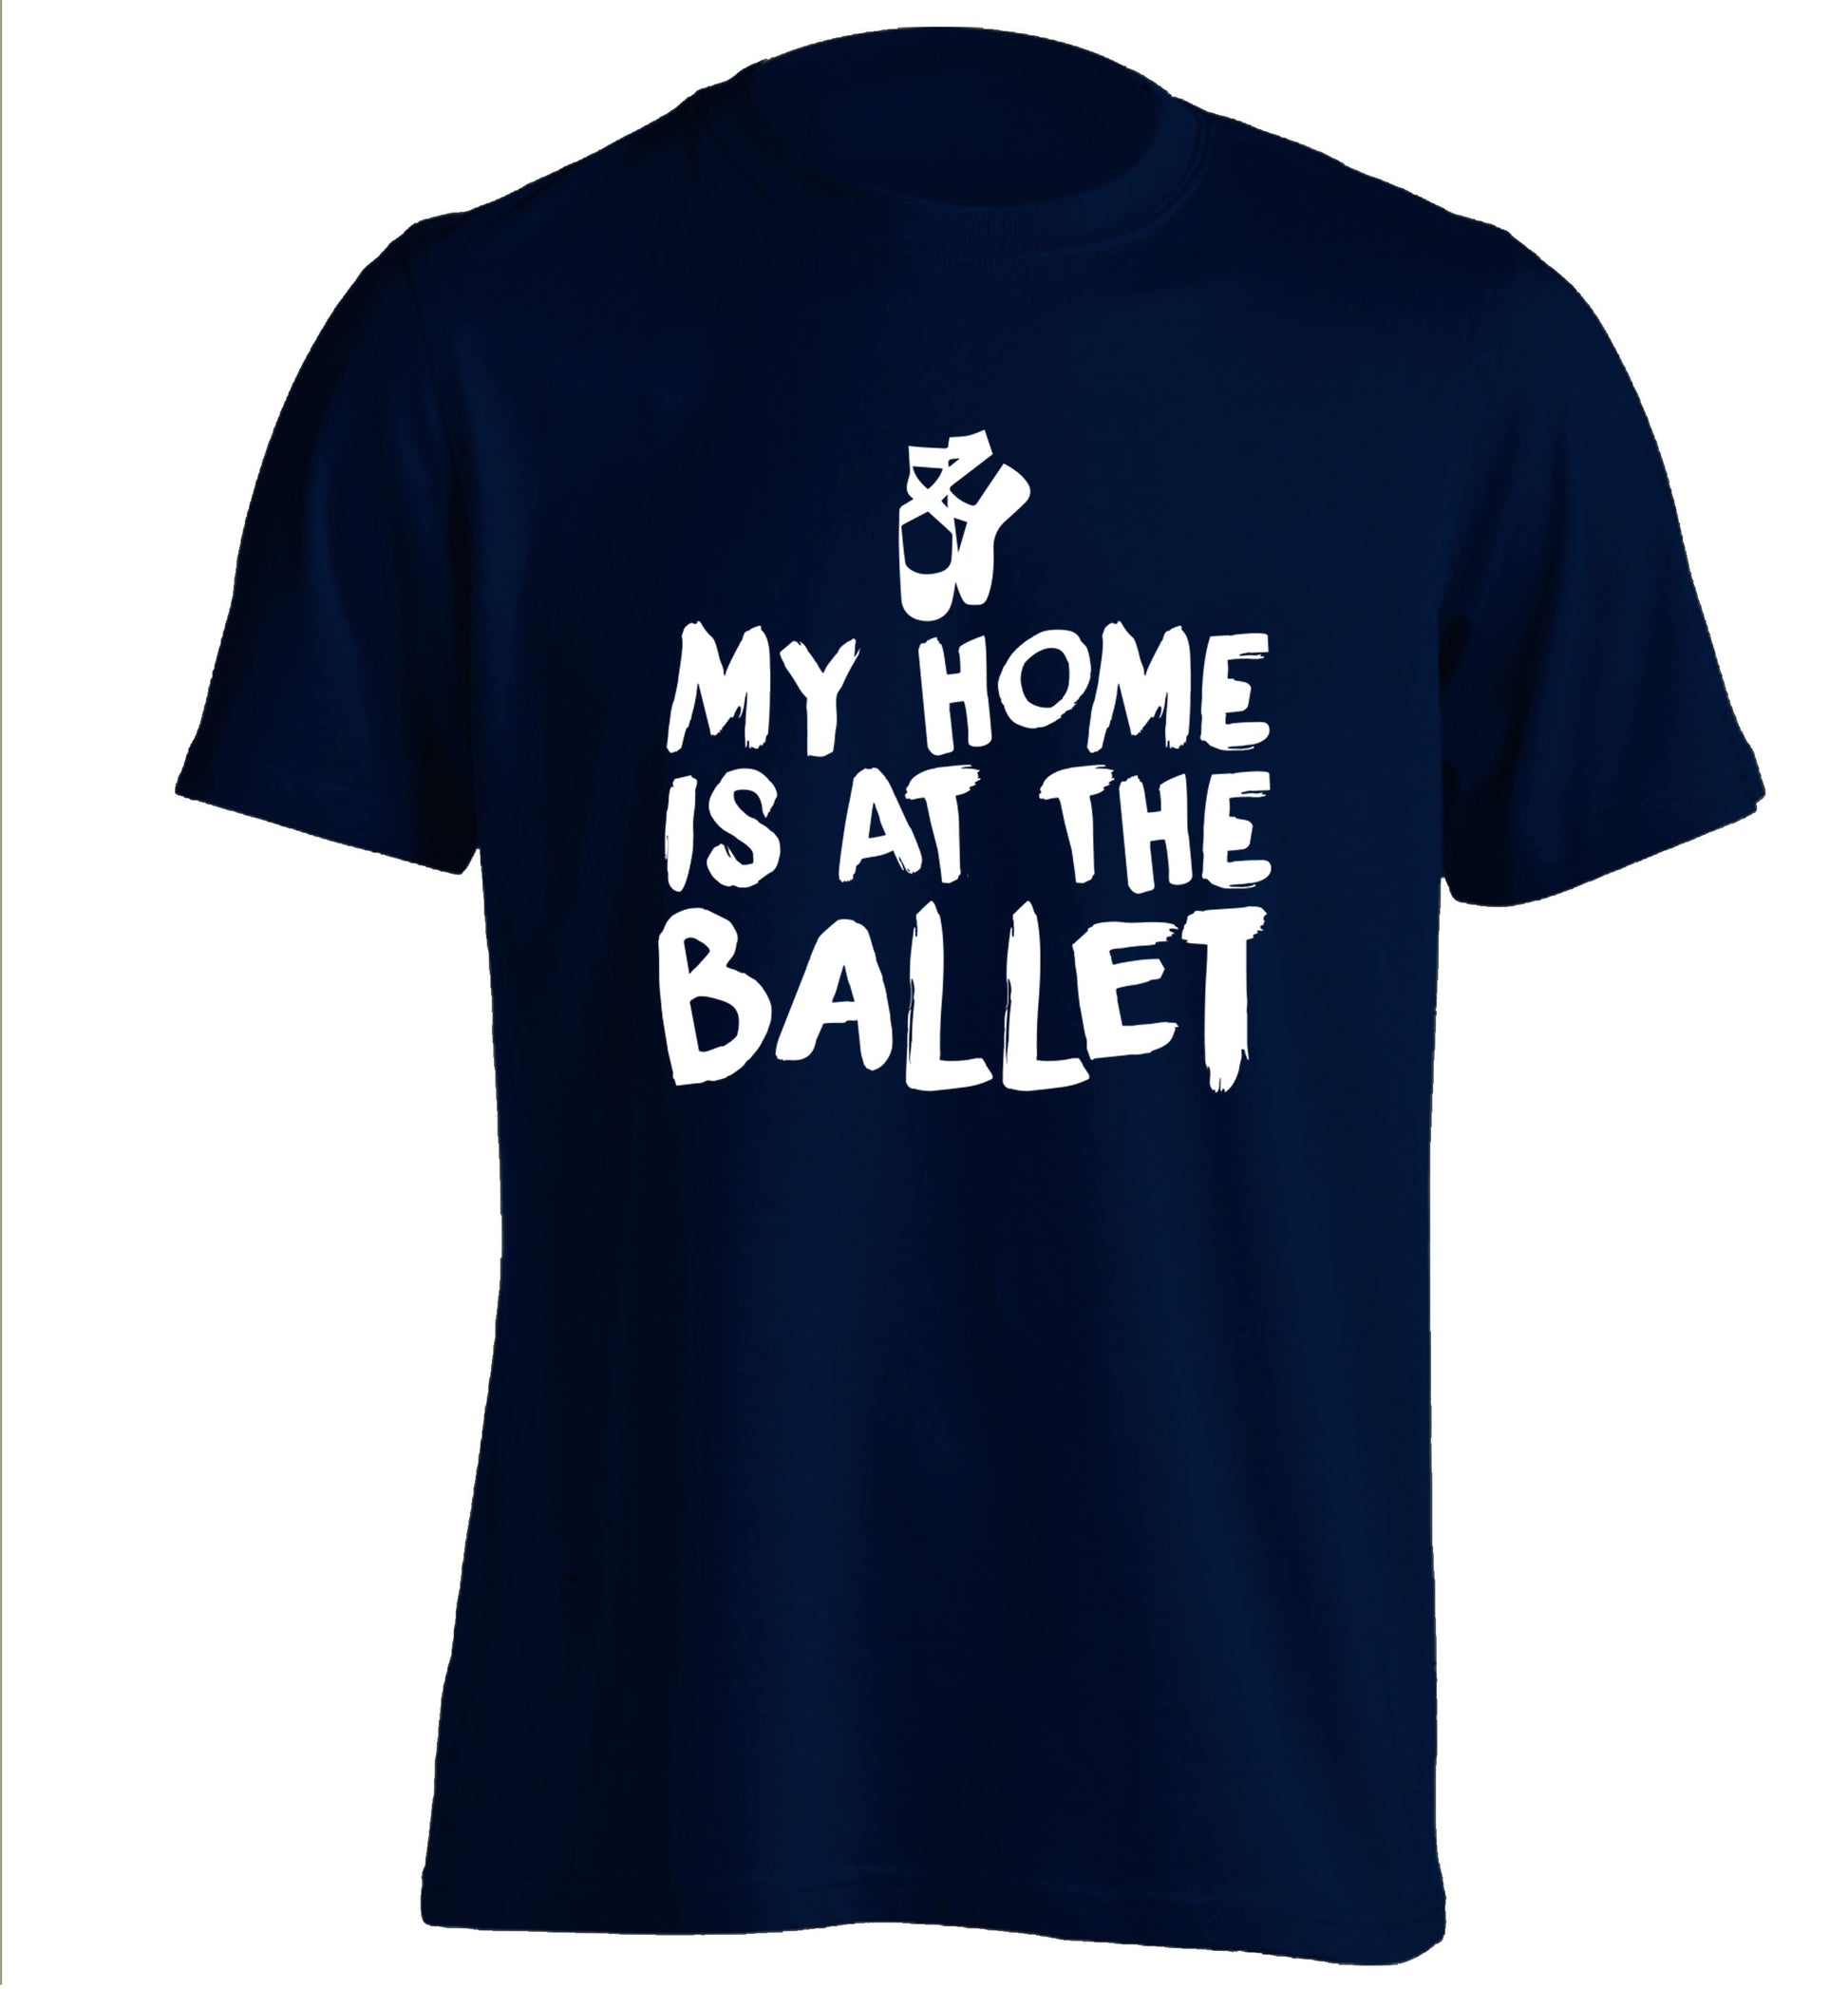 My home is at the dance studio adults unisex navy Tshirt 2XL